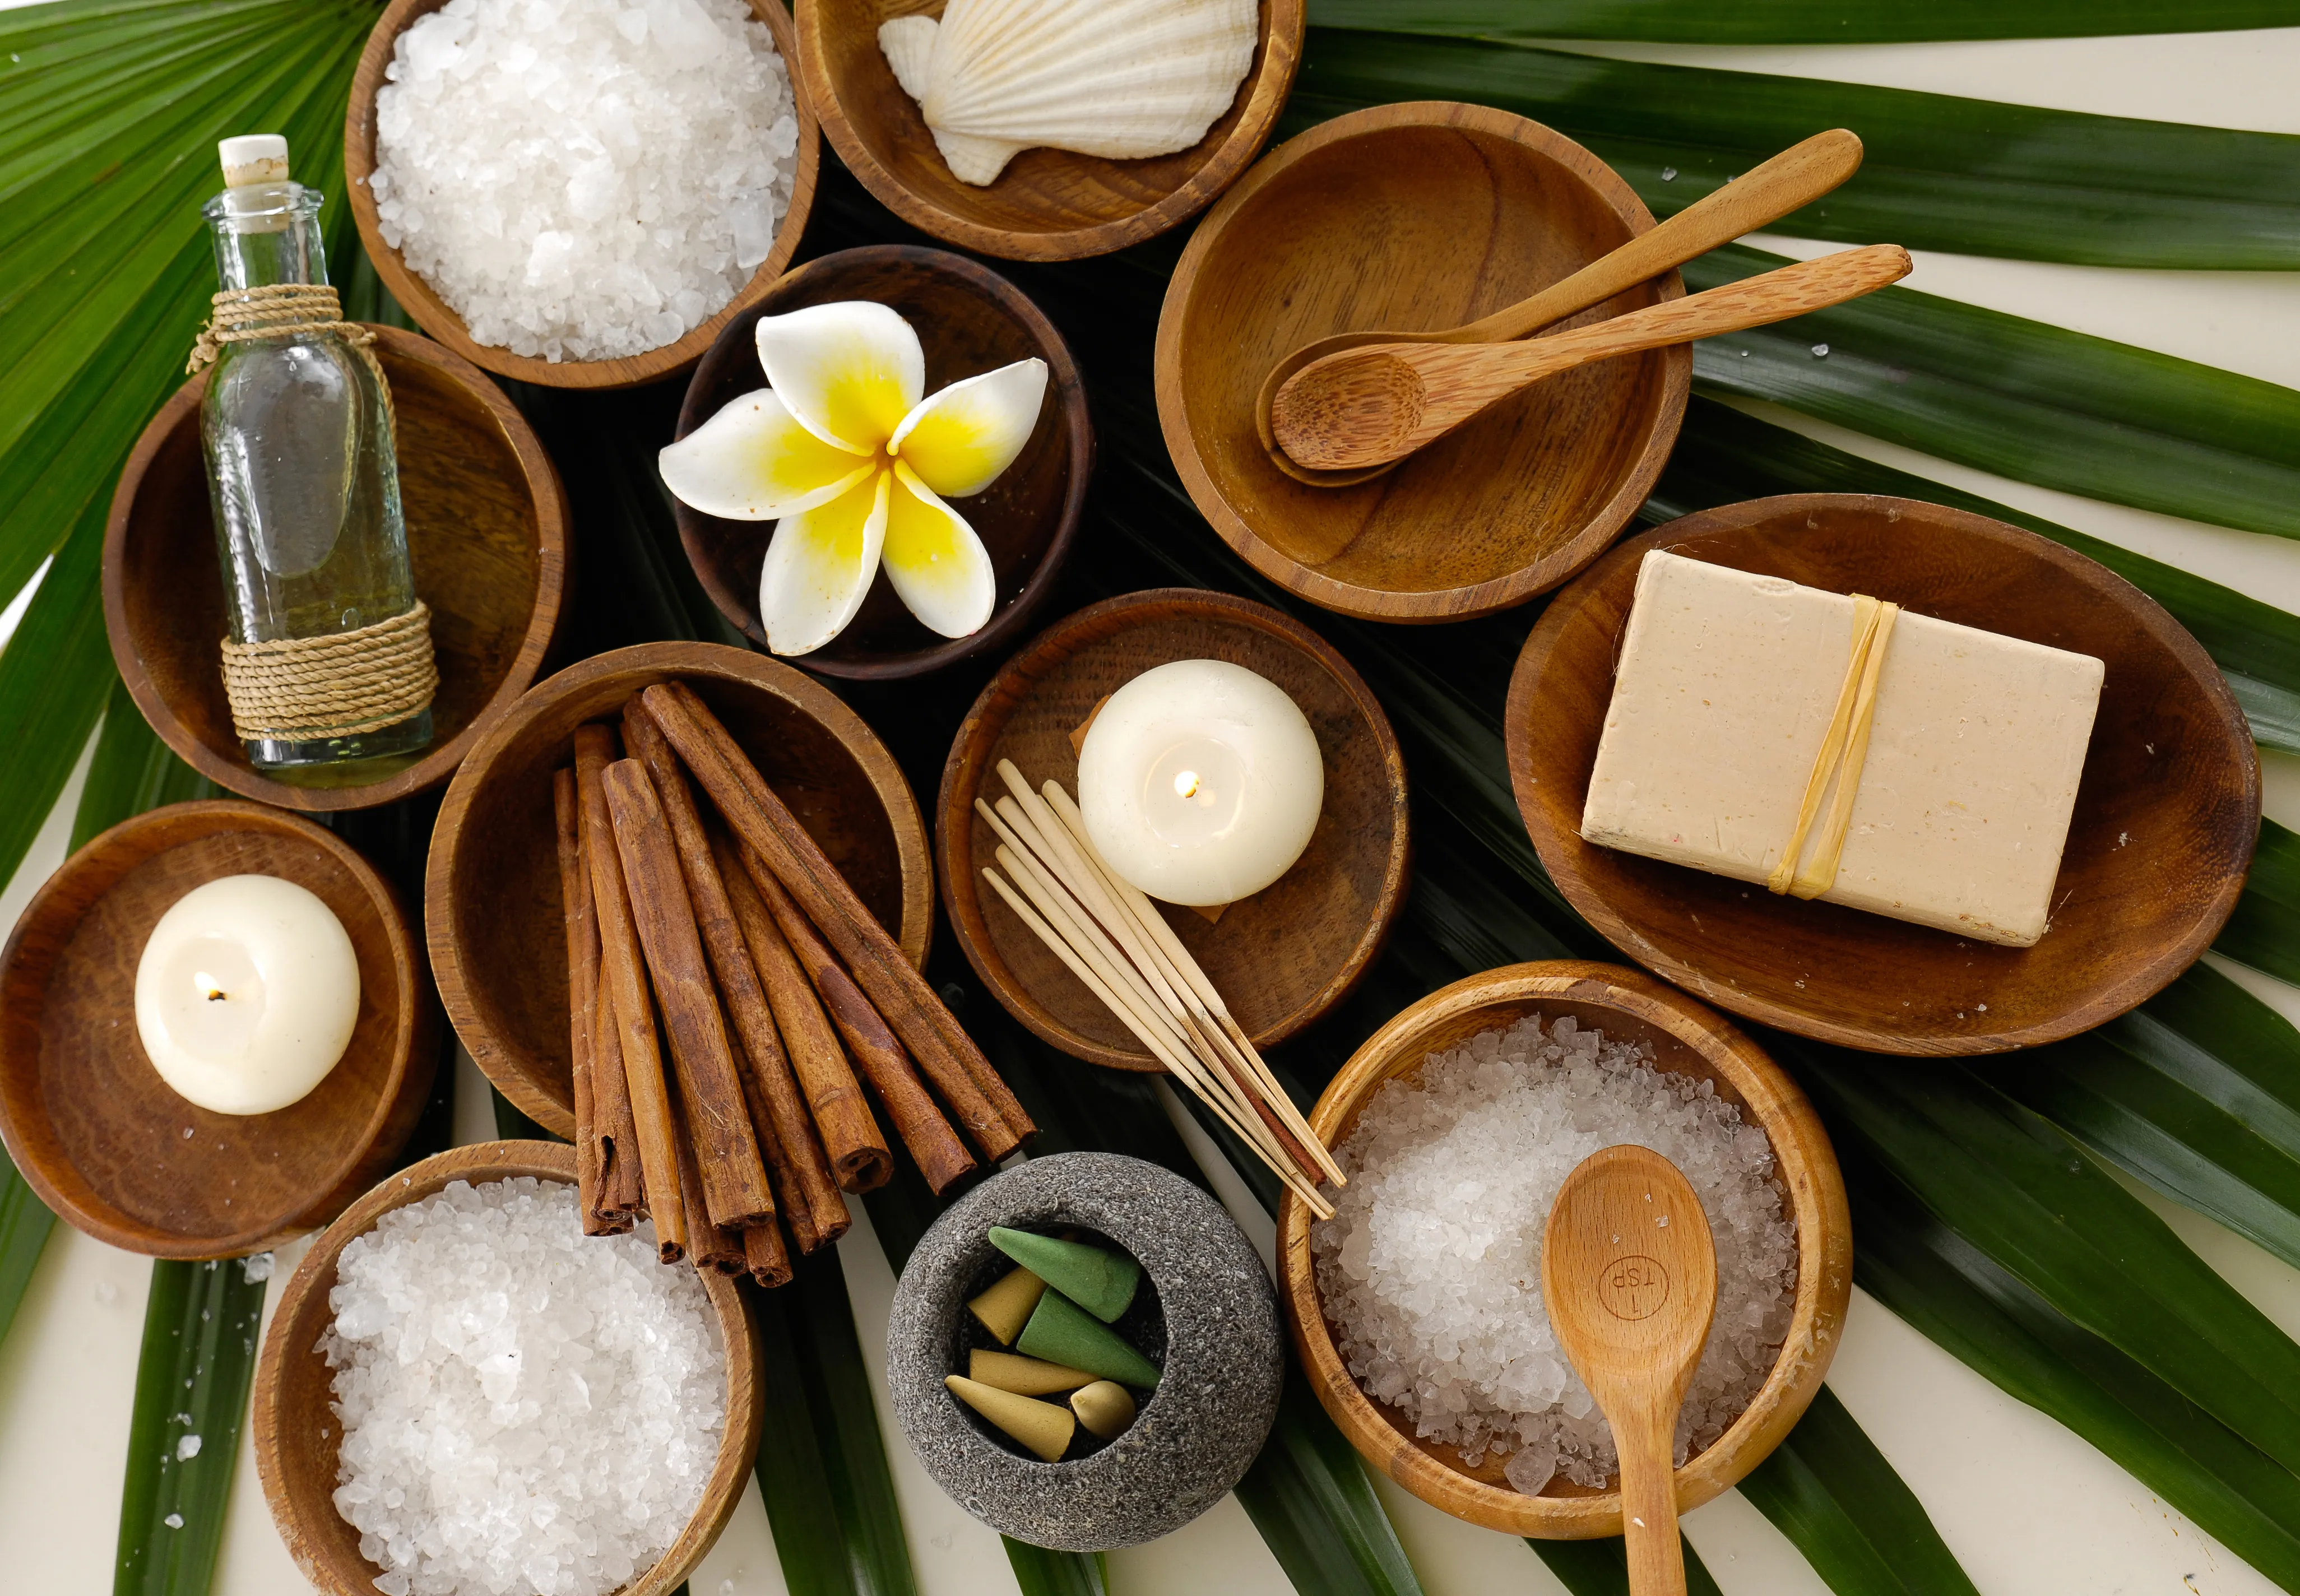 A collection of natural beauty products, including organic skincare essentials, herbal remedies, and handmade cosmetics.